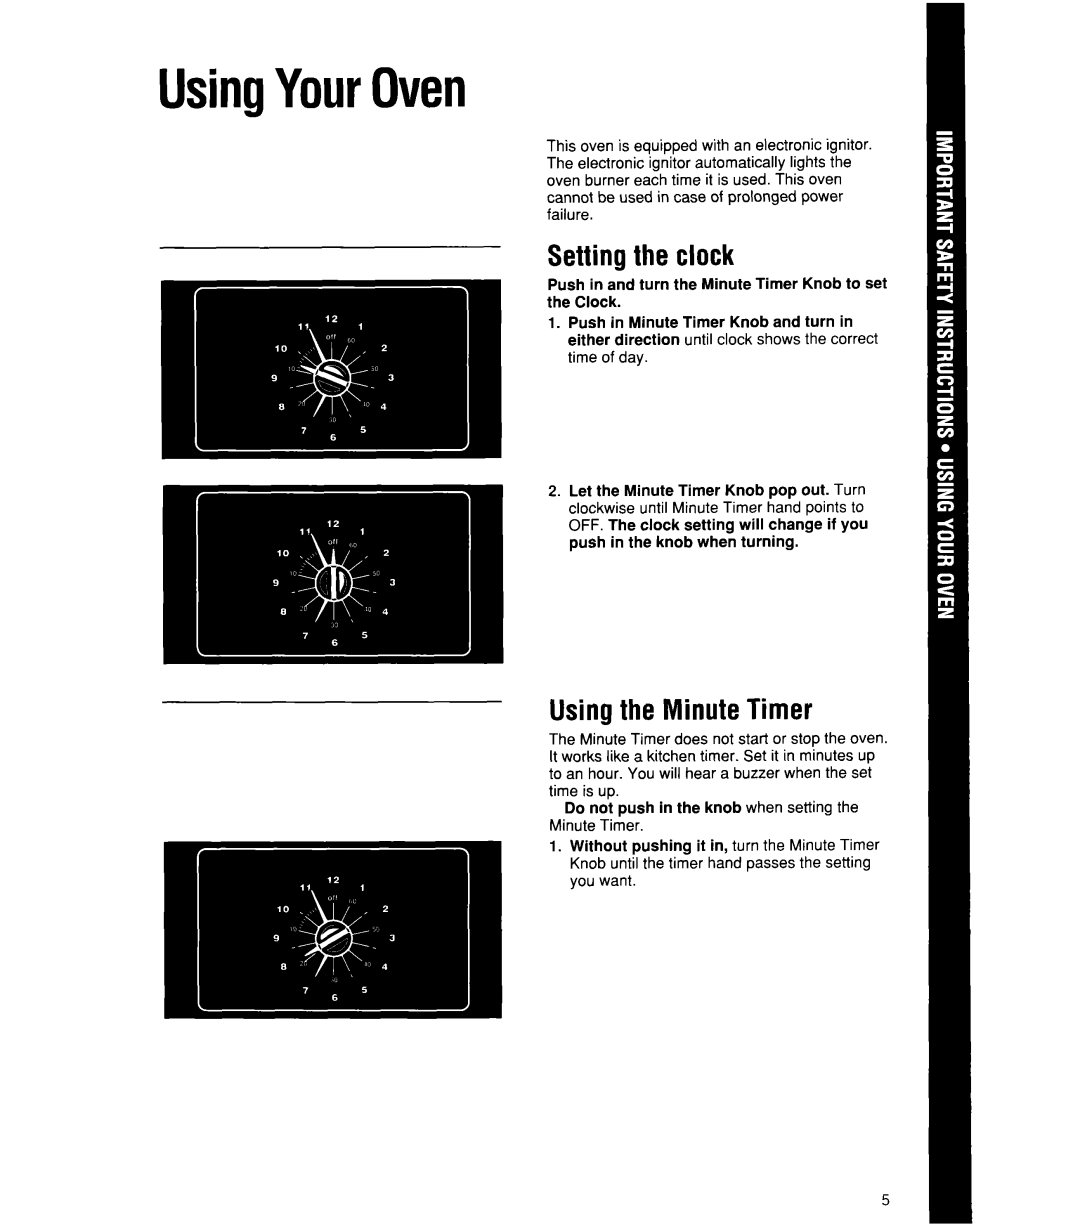 Whirlpool SBlOOPES manual UsingYourOven, Settingthe clock, Usingthe Minute Timer 